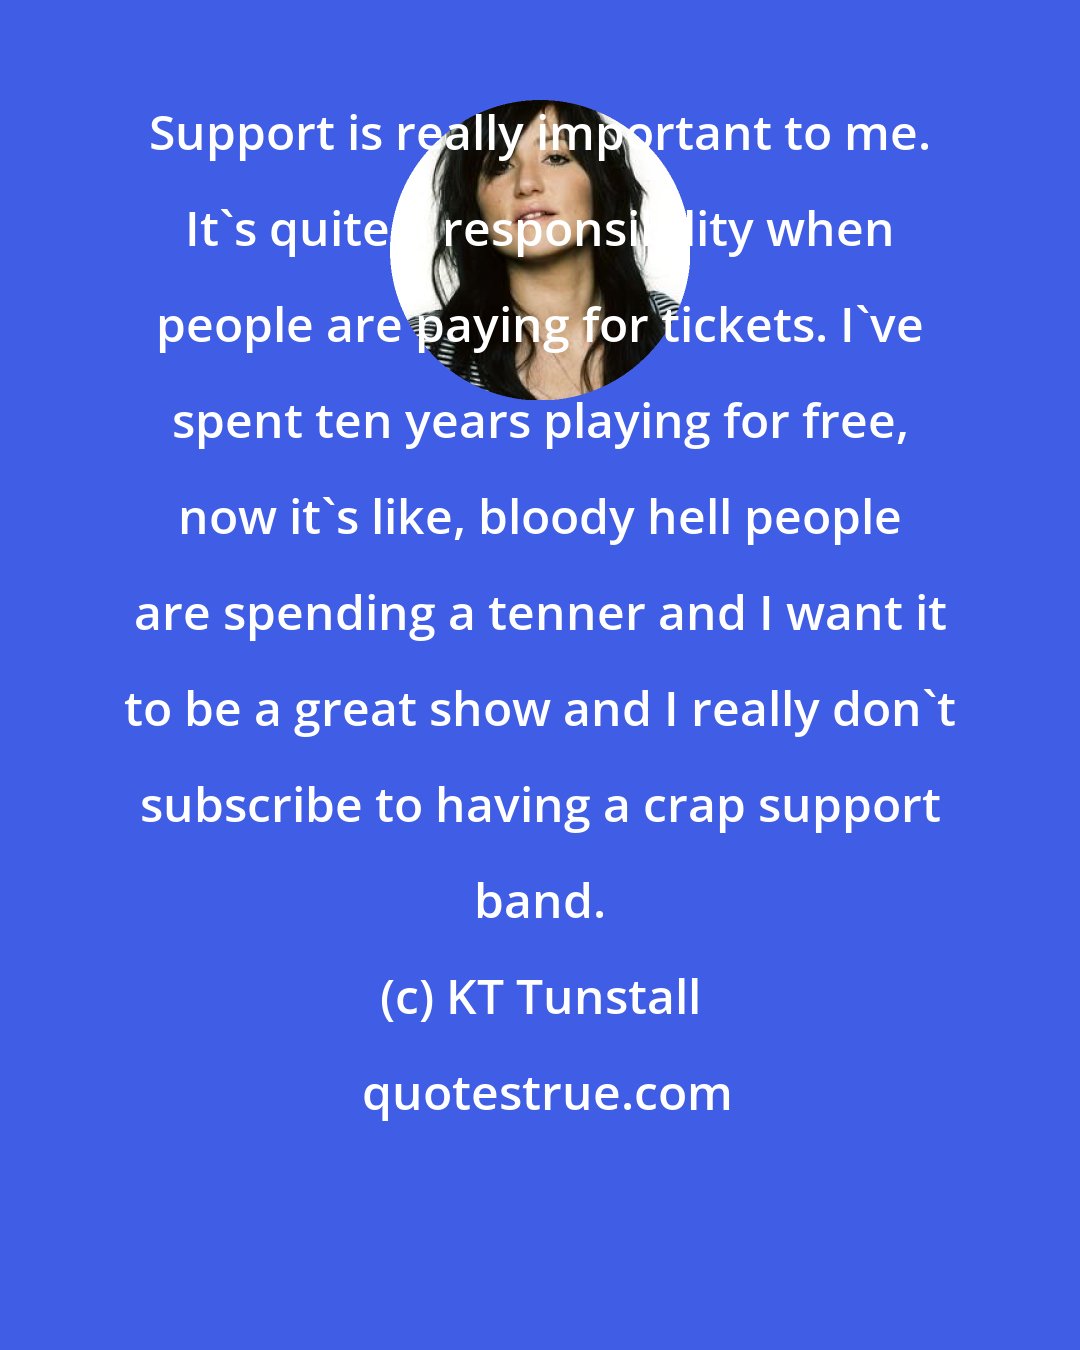 KT Tunstall: Support is really important to me. It's quite a responsibility when people are paying for tickets. I've spent ten years playing for free, now it's like, bloody hell people are spending a tenner and I want it to be a great show and I really don't subscribe to having a crap support band.